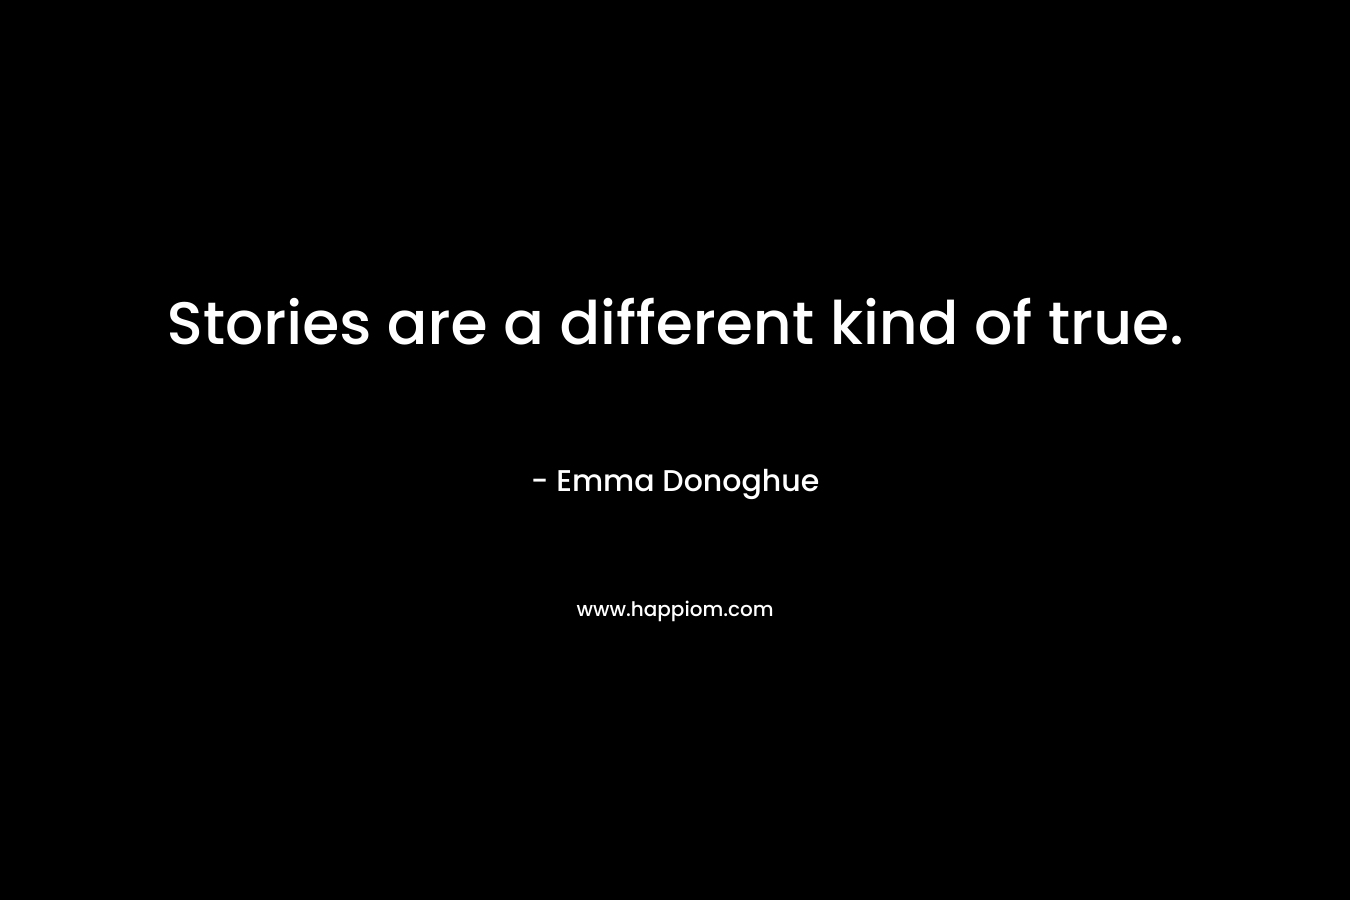 Stories are a different kind of true. – Emma Donoghue